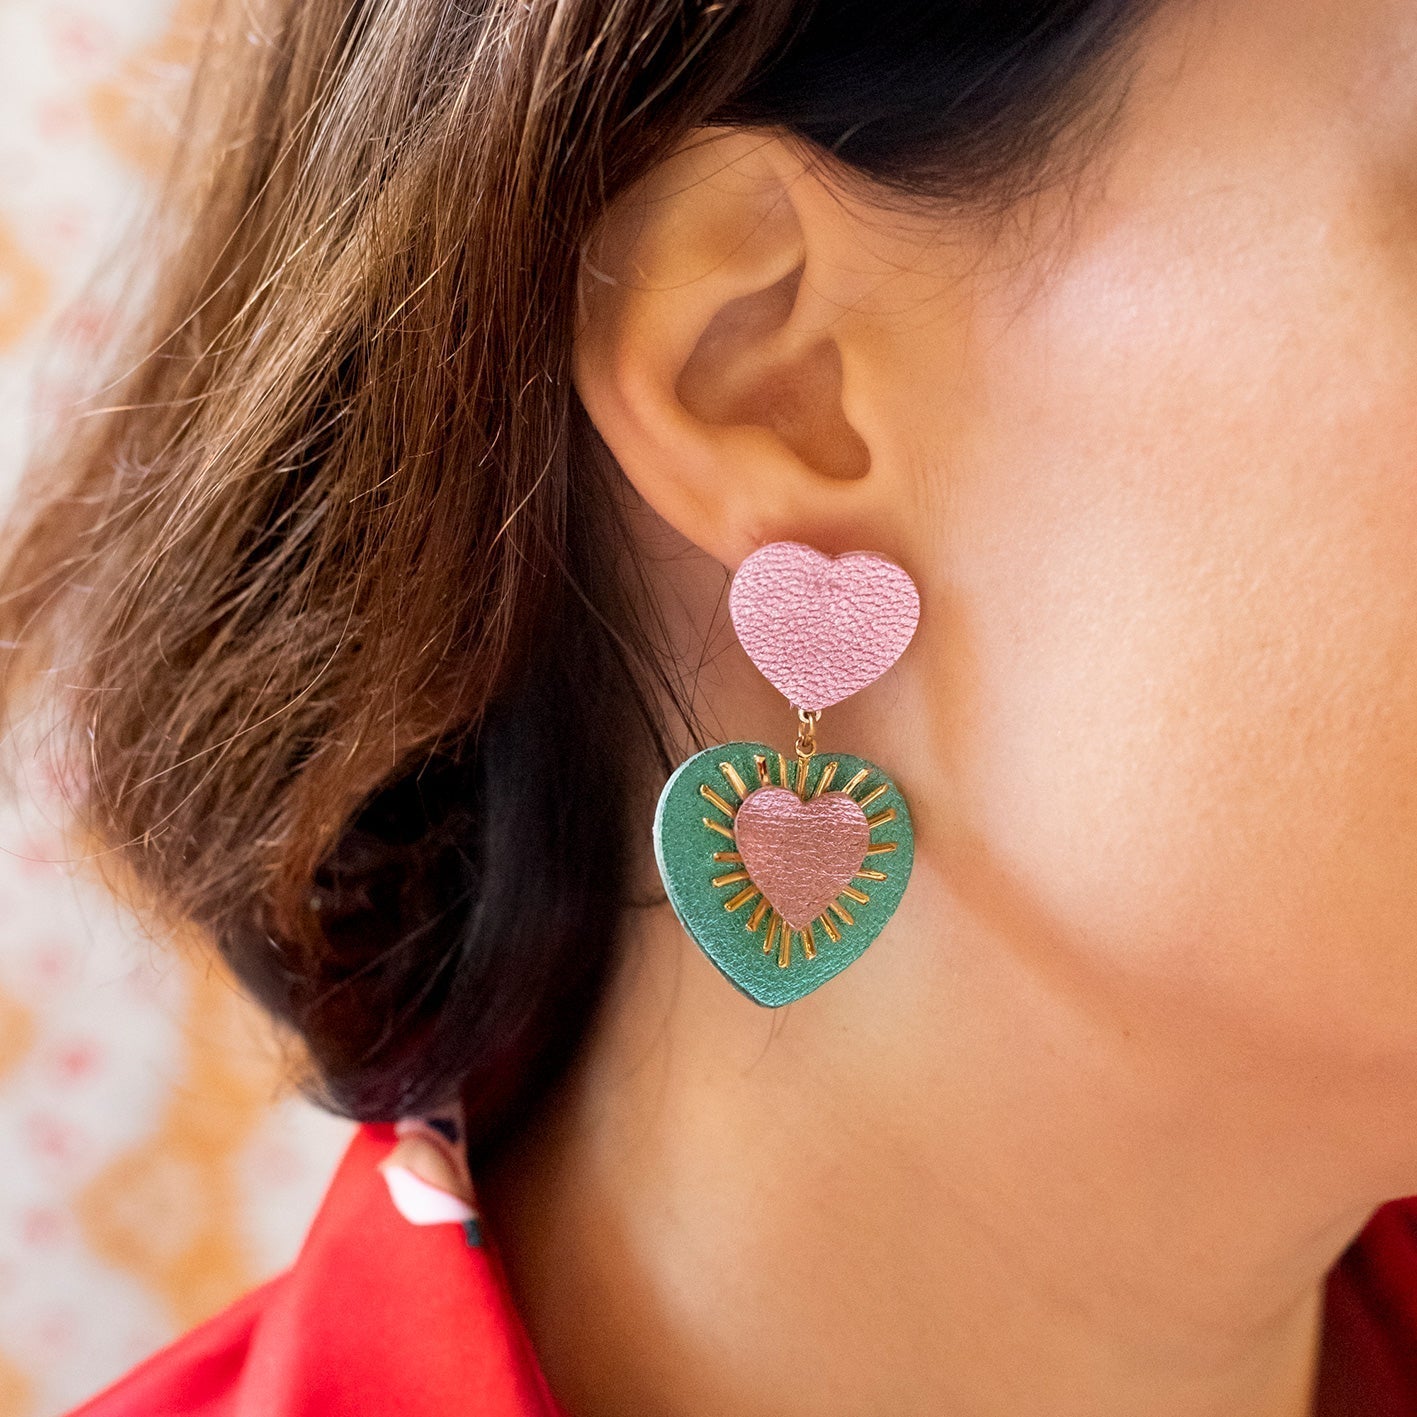 Sacré Coeur earrings in metallic green and red leather